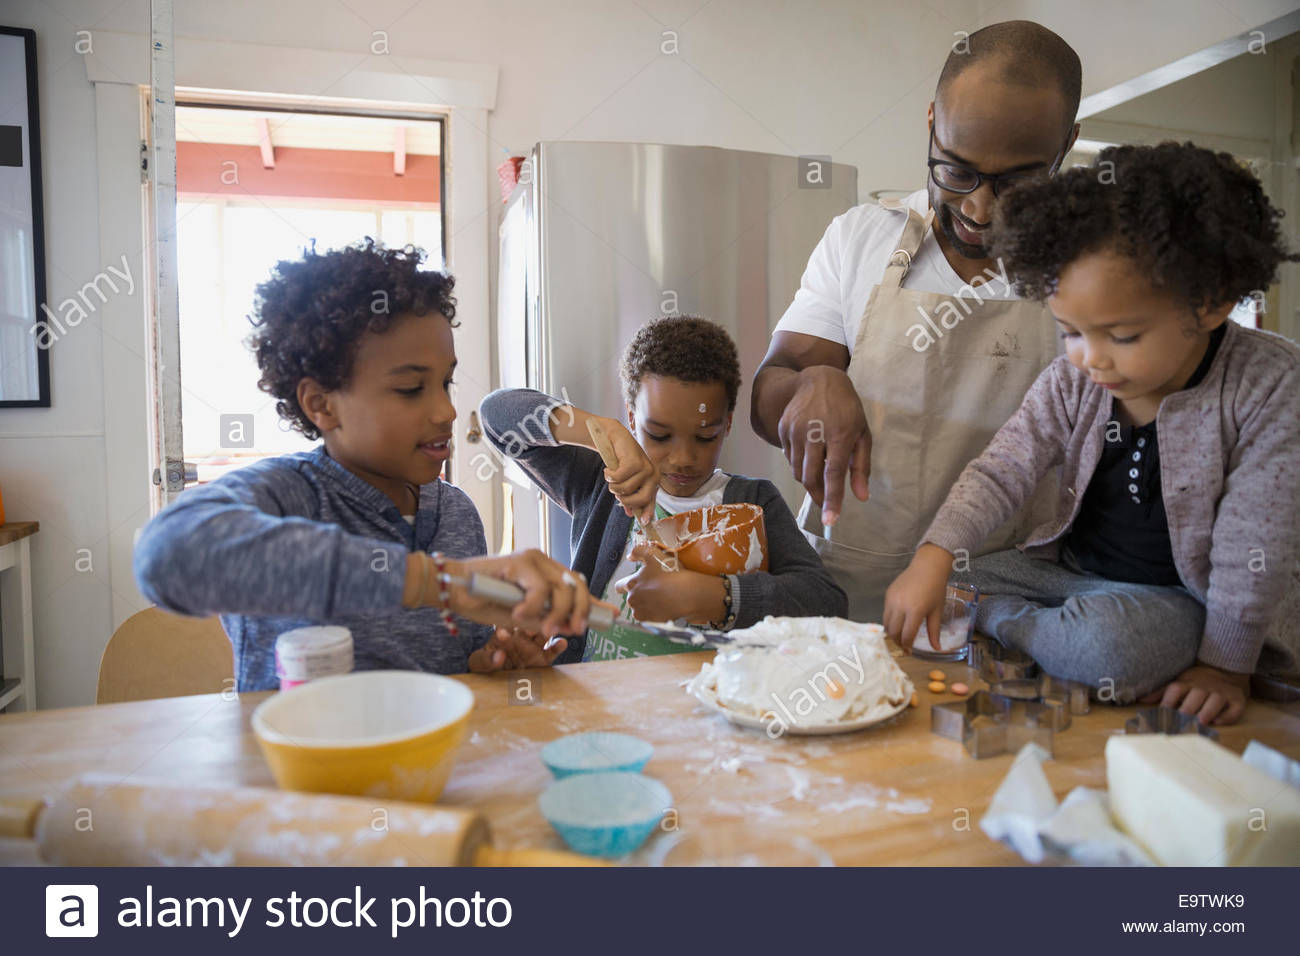 Father and children baking cake in kitchen Stock Photo